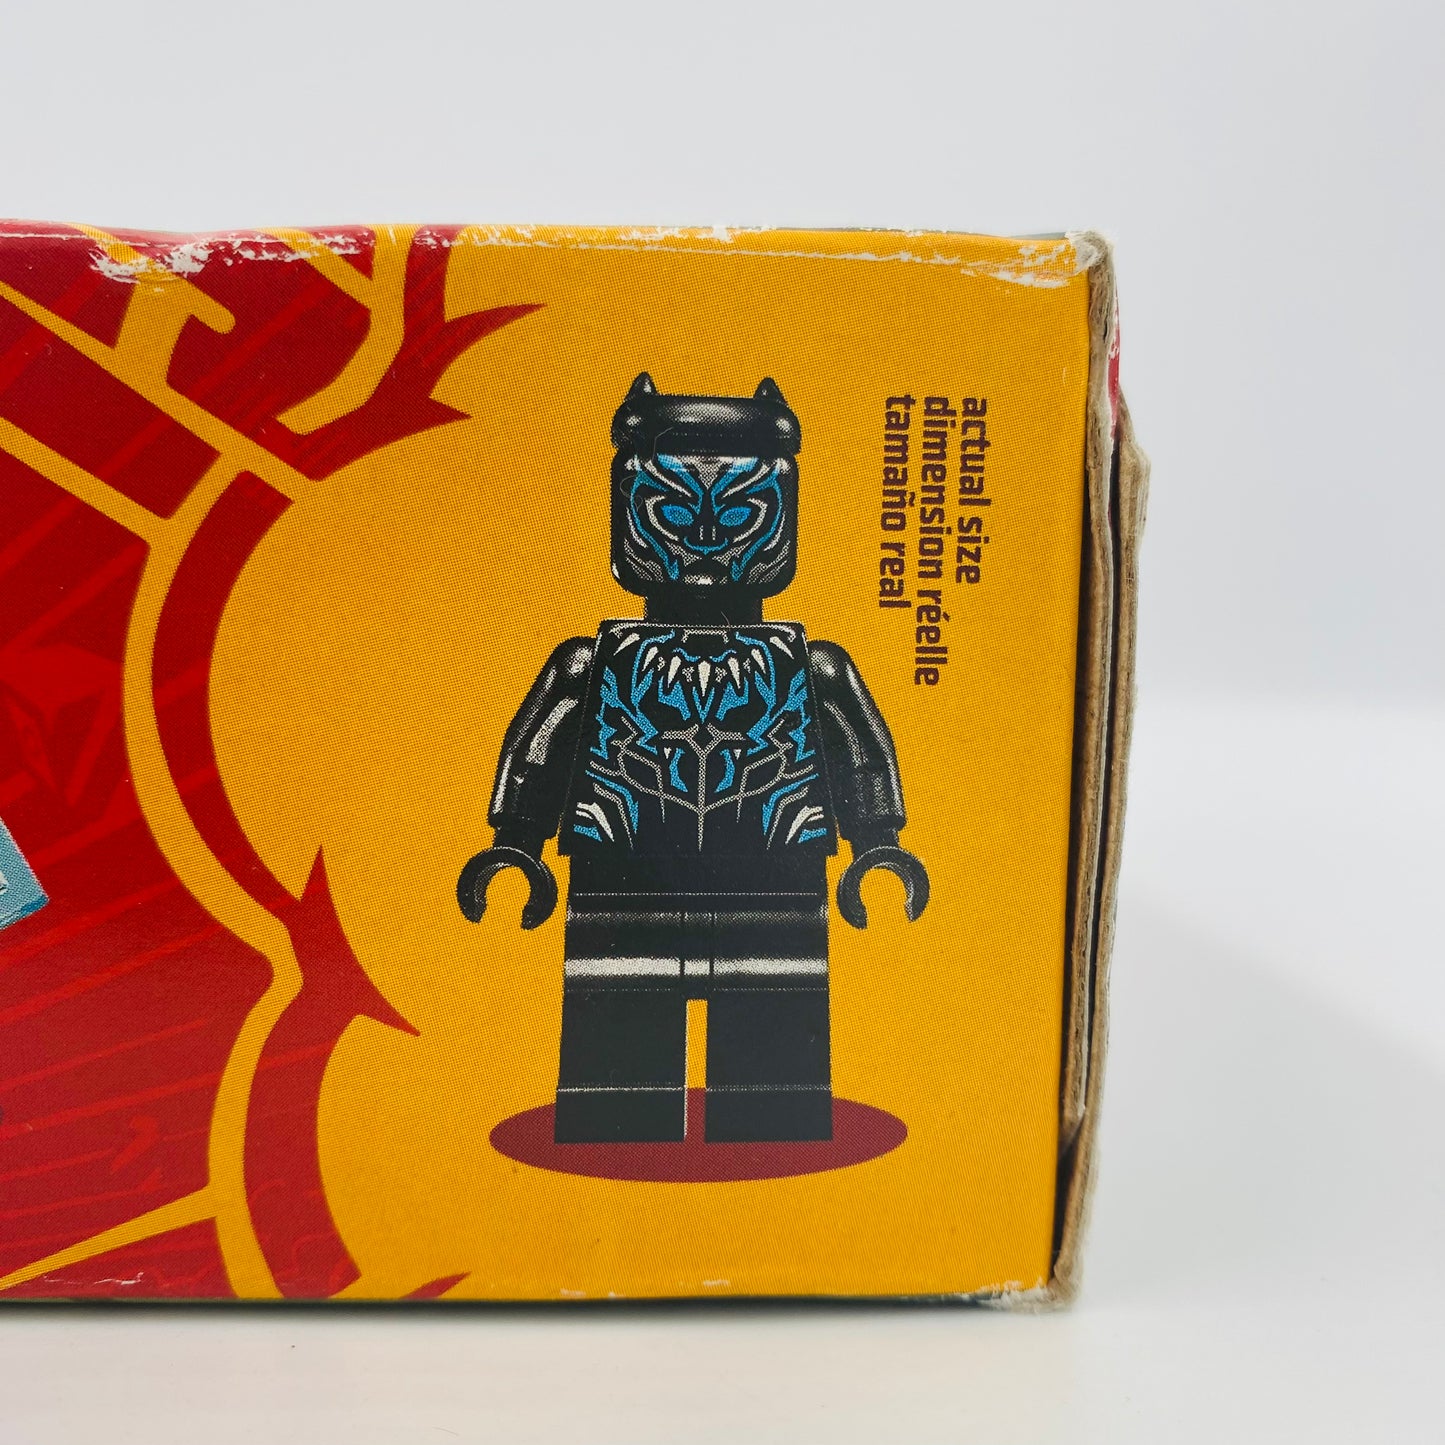 LEGO Marvel Super Heroes Black Panther Rhino Face-off by the Mine boxed set (2018) 76099